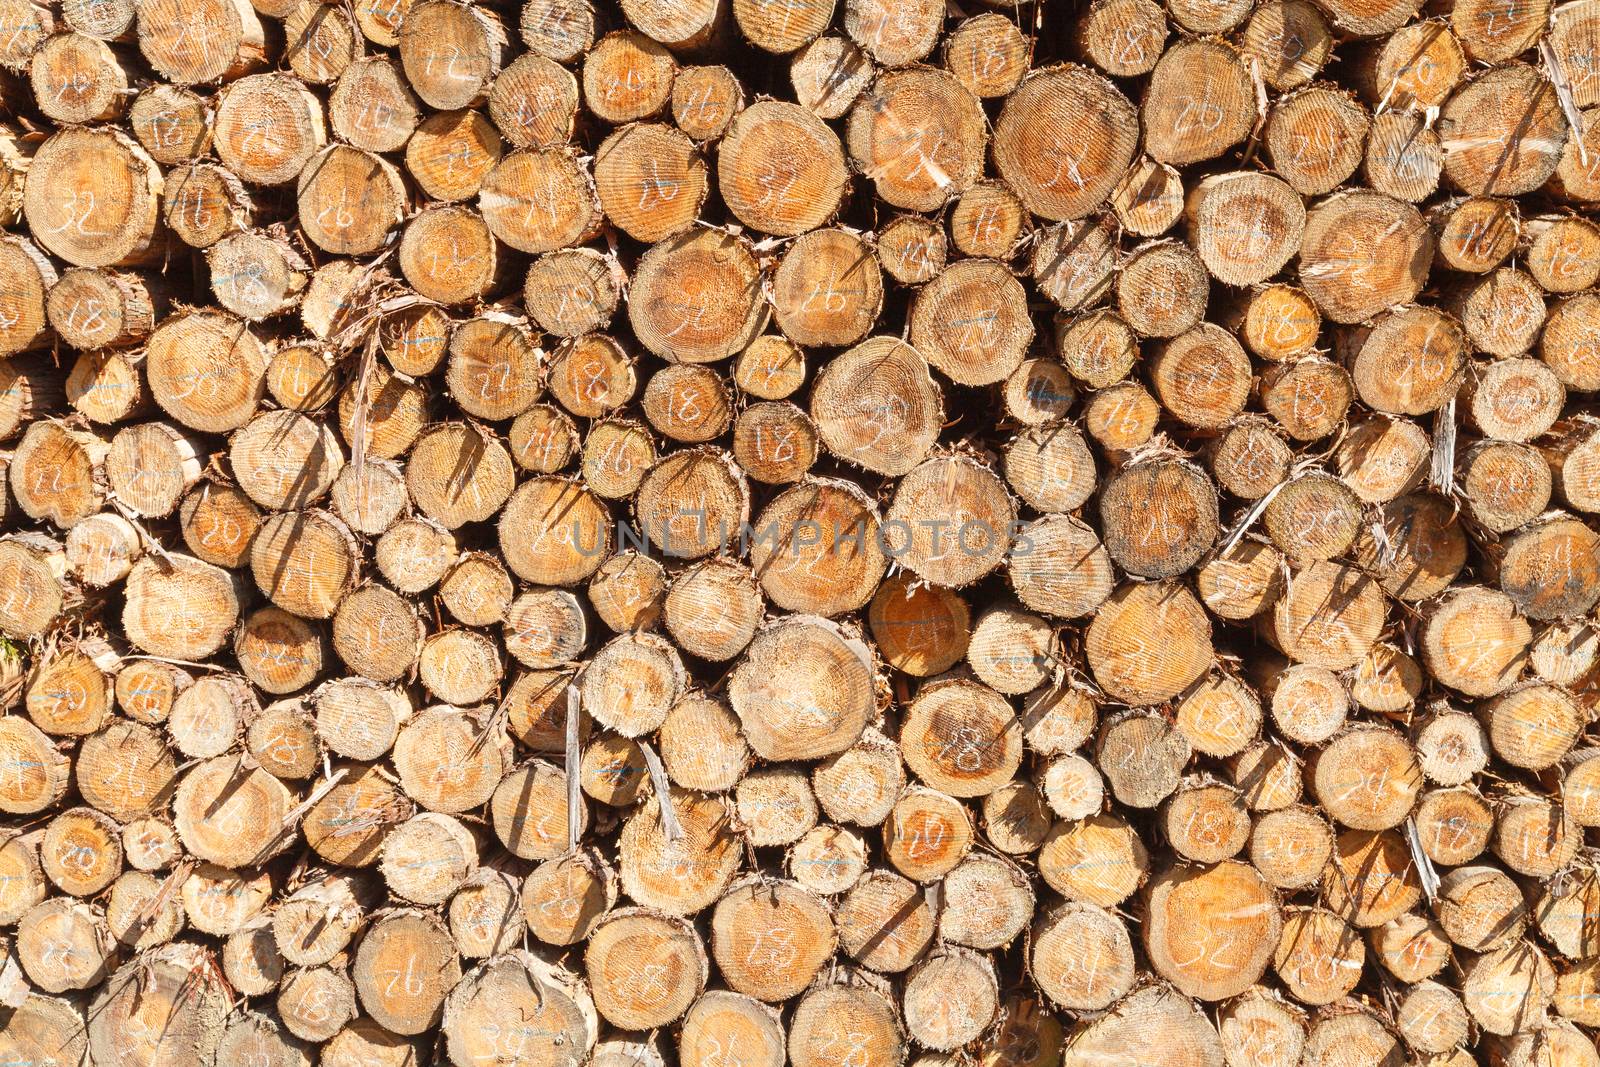 Pile of freshly cut tree logs under bright sunlight show wood texture.